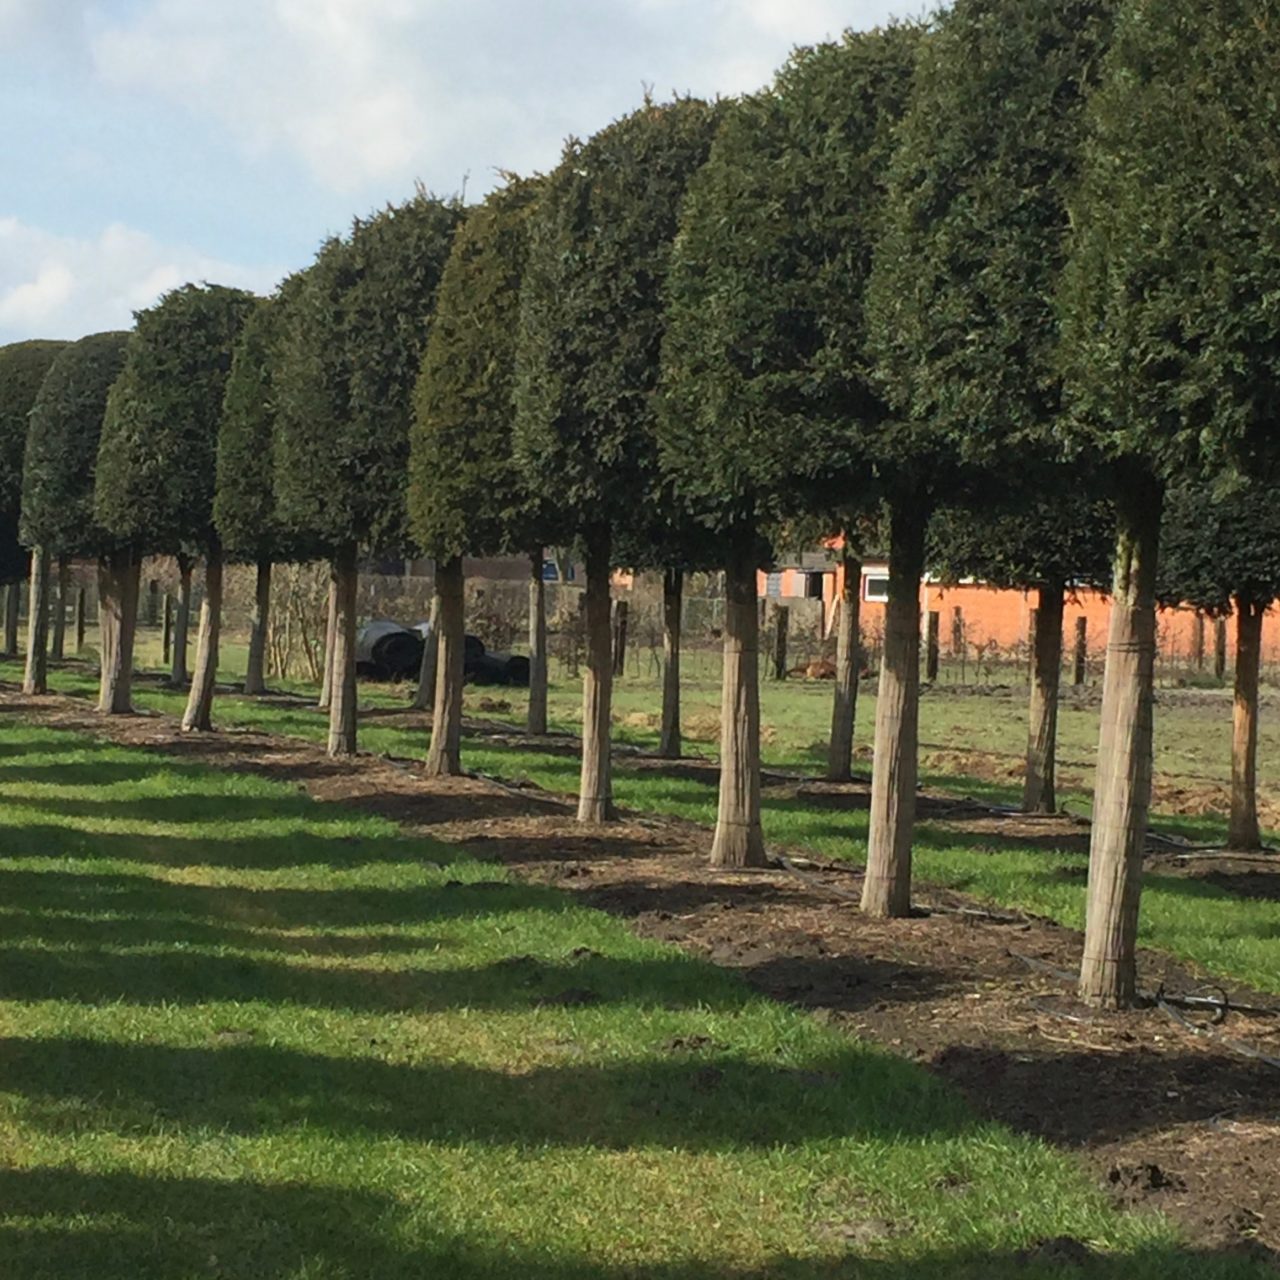 A line of yew domes on stems for Alice in Wonderland style topiary